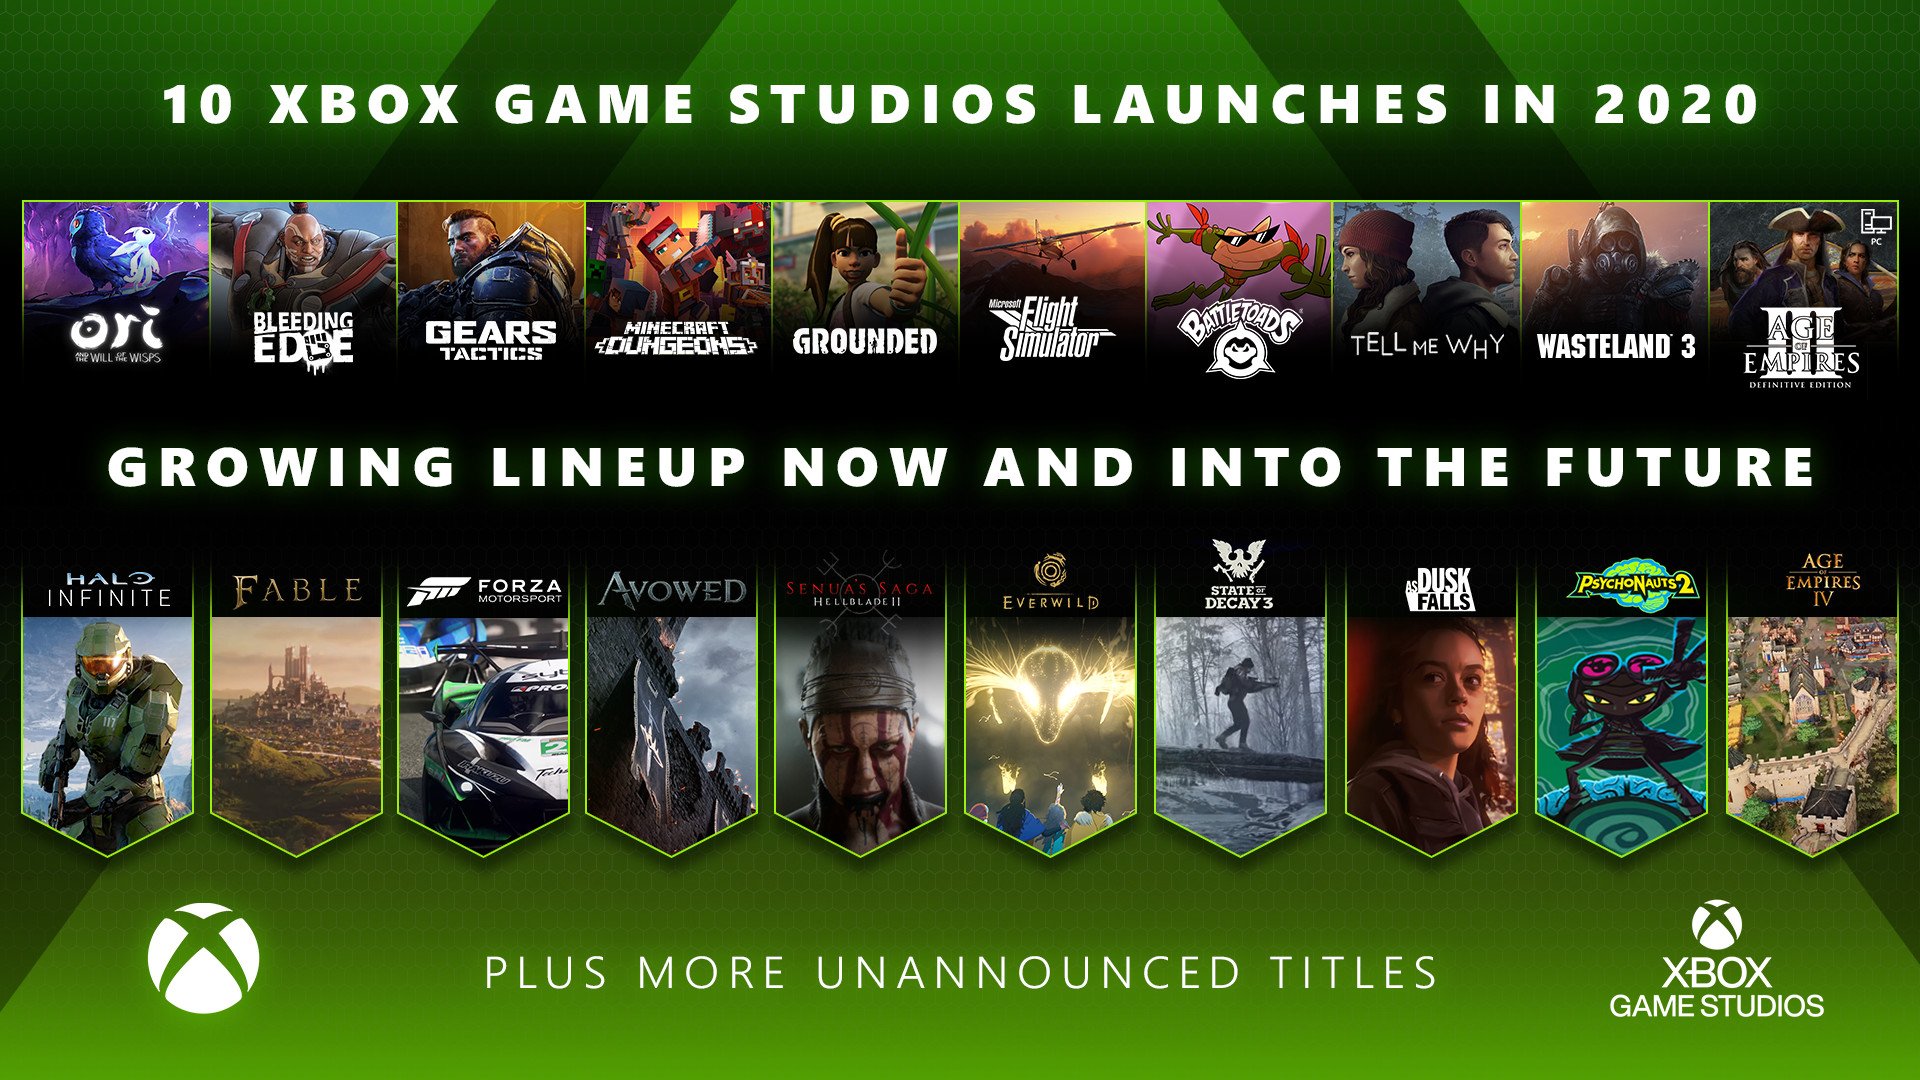 Xbox Game Studios Publishing on X: On behalf of all of us in